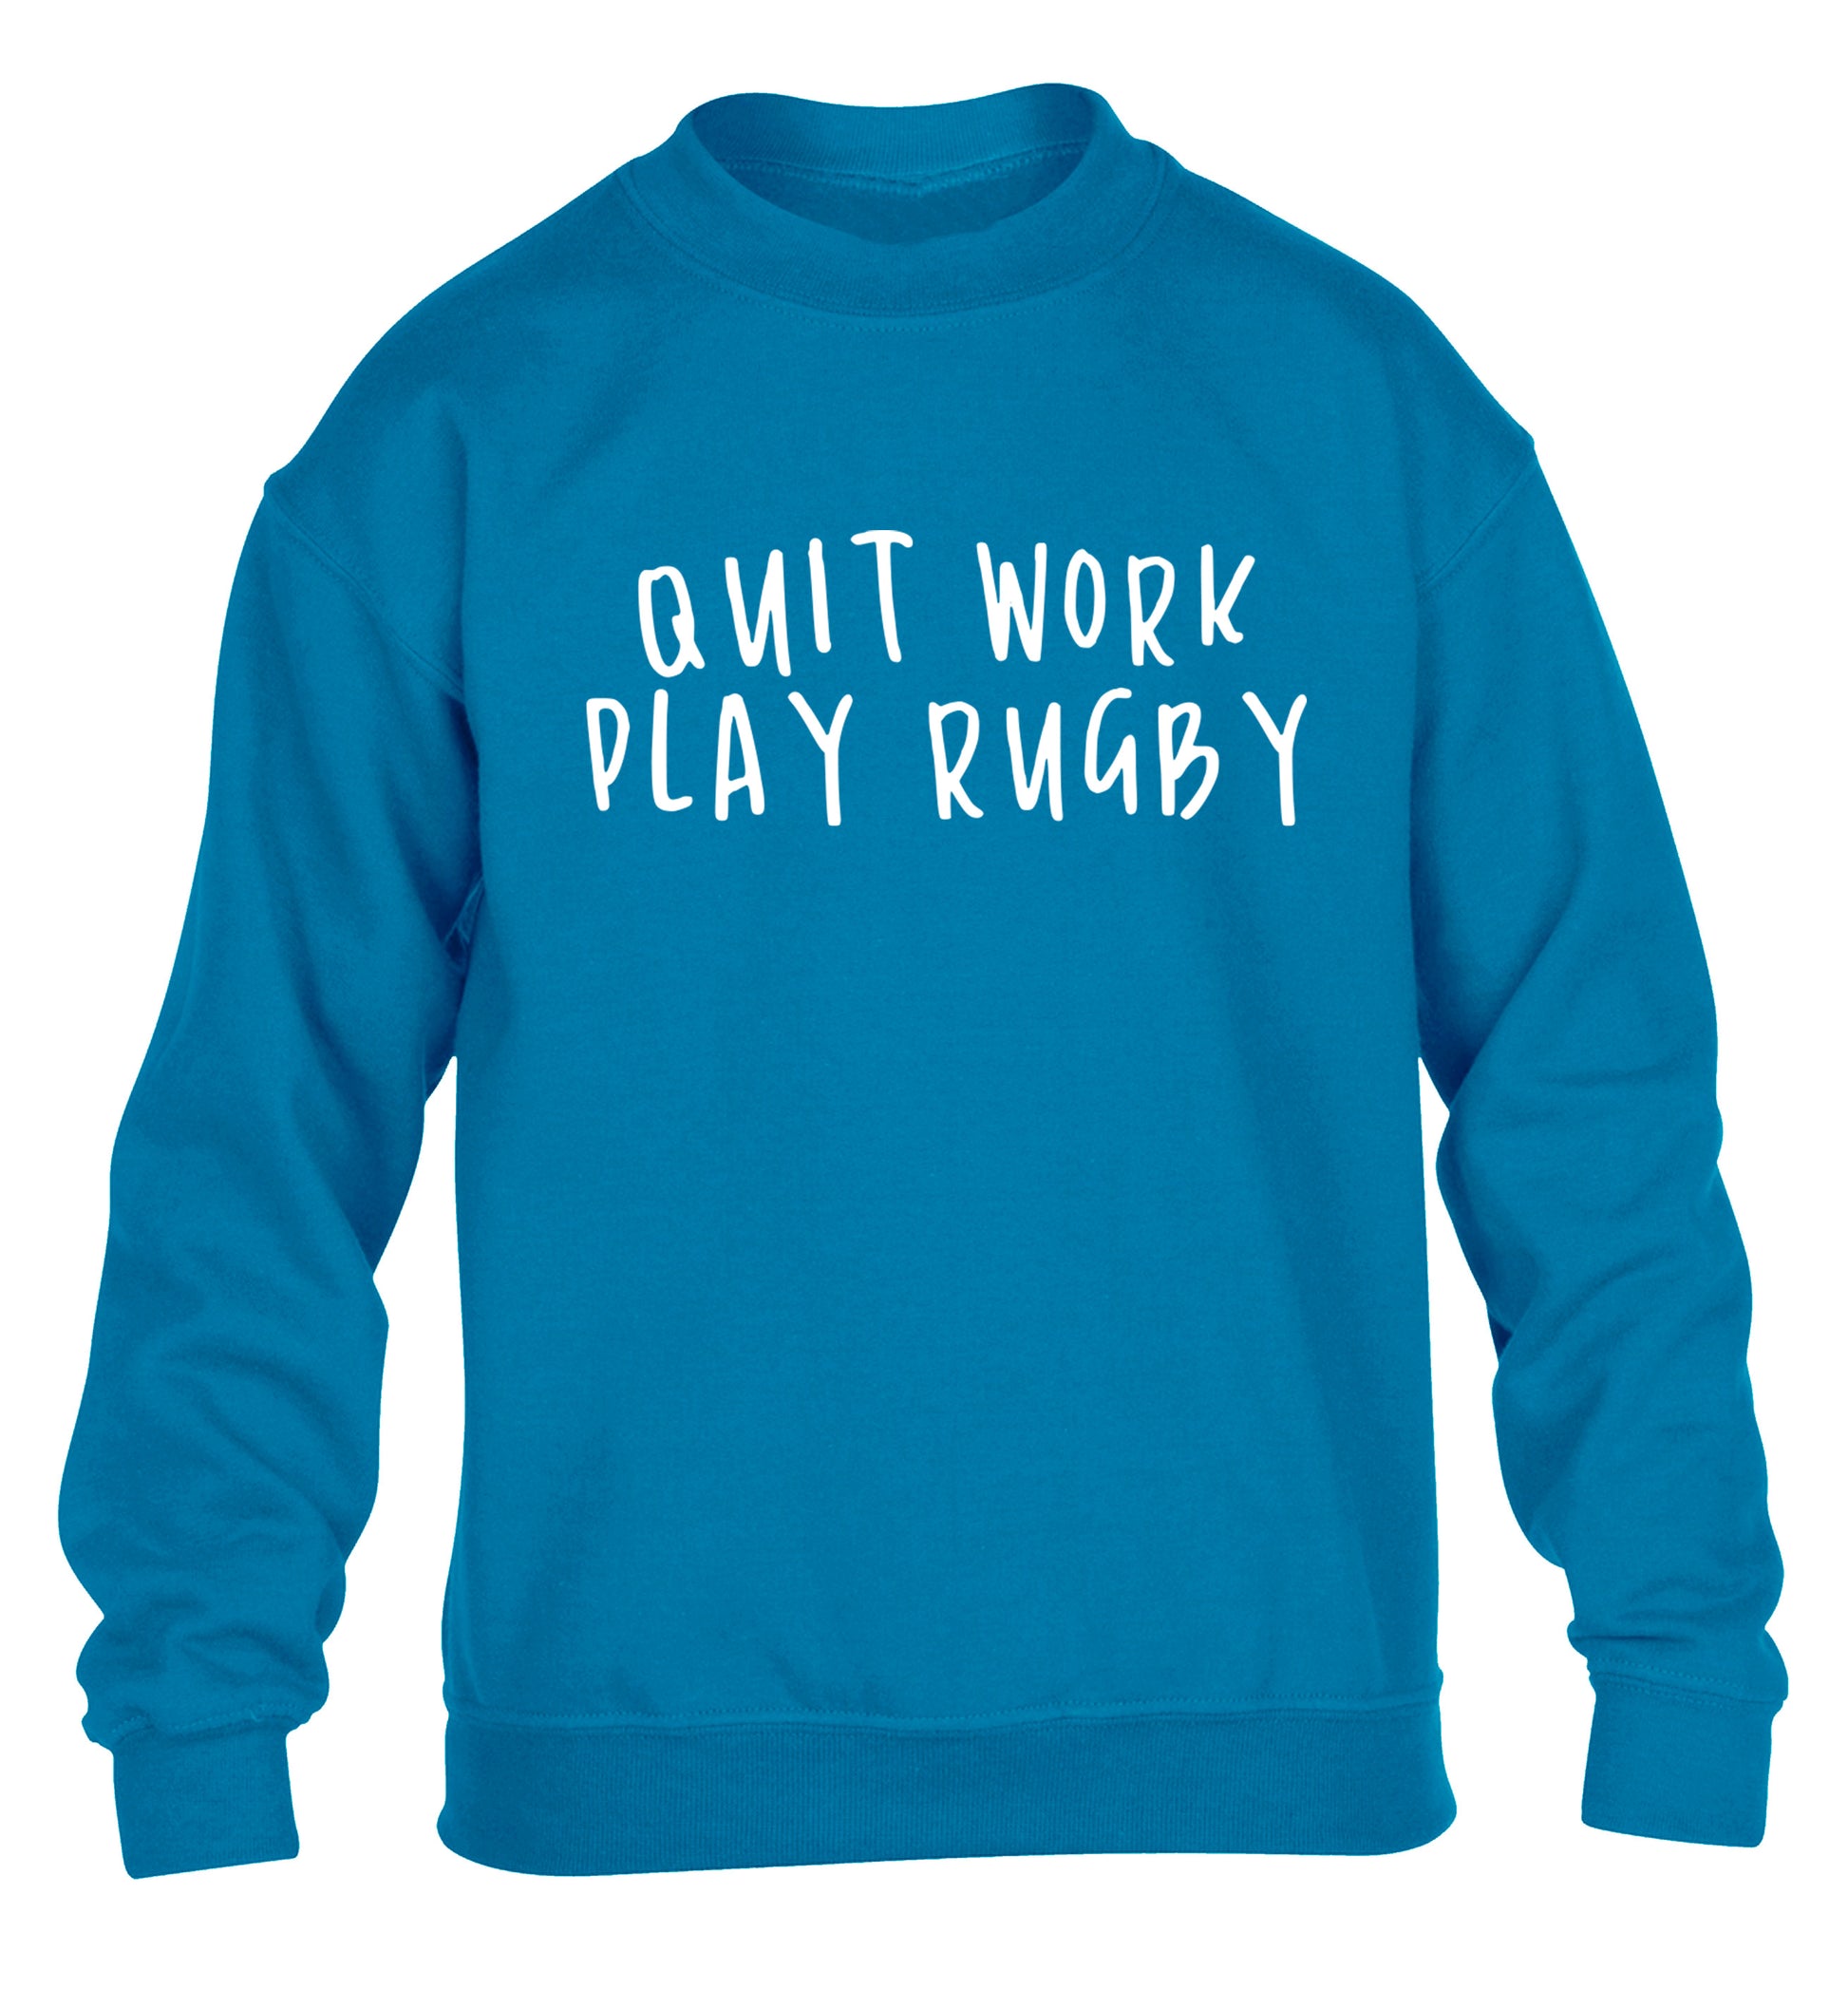 Quit work play rugby children's blue sweater 12-13 Years